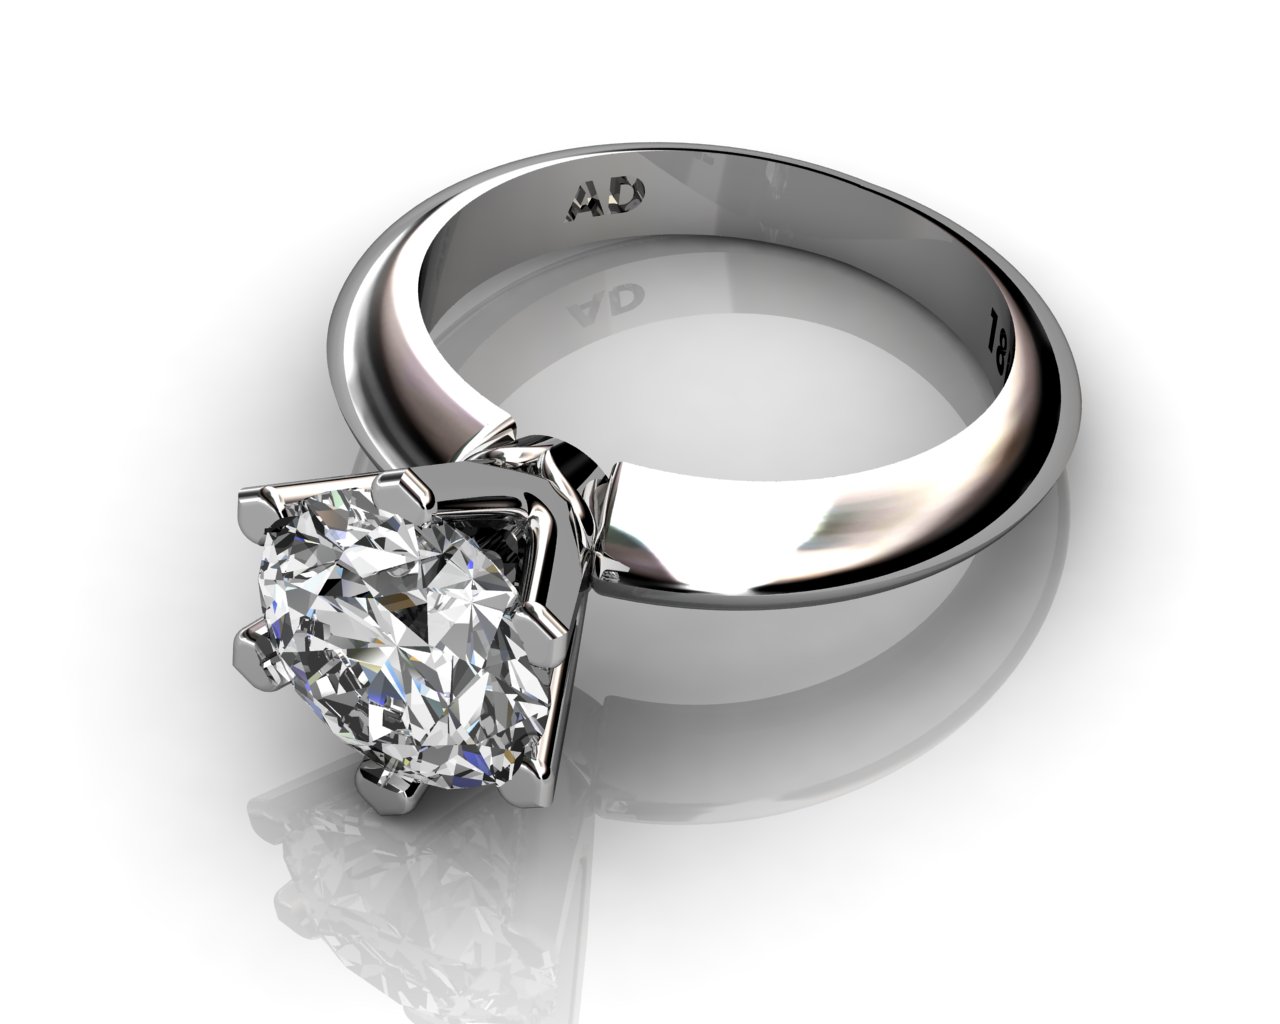 Diamond Solitaire Engagement Ring Round Cut 2.50ct Diamond 6 PRONGS 6gr 18kt White Gold - South Bay Gold Torrance